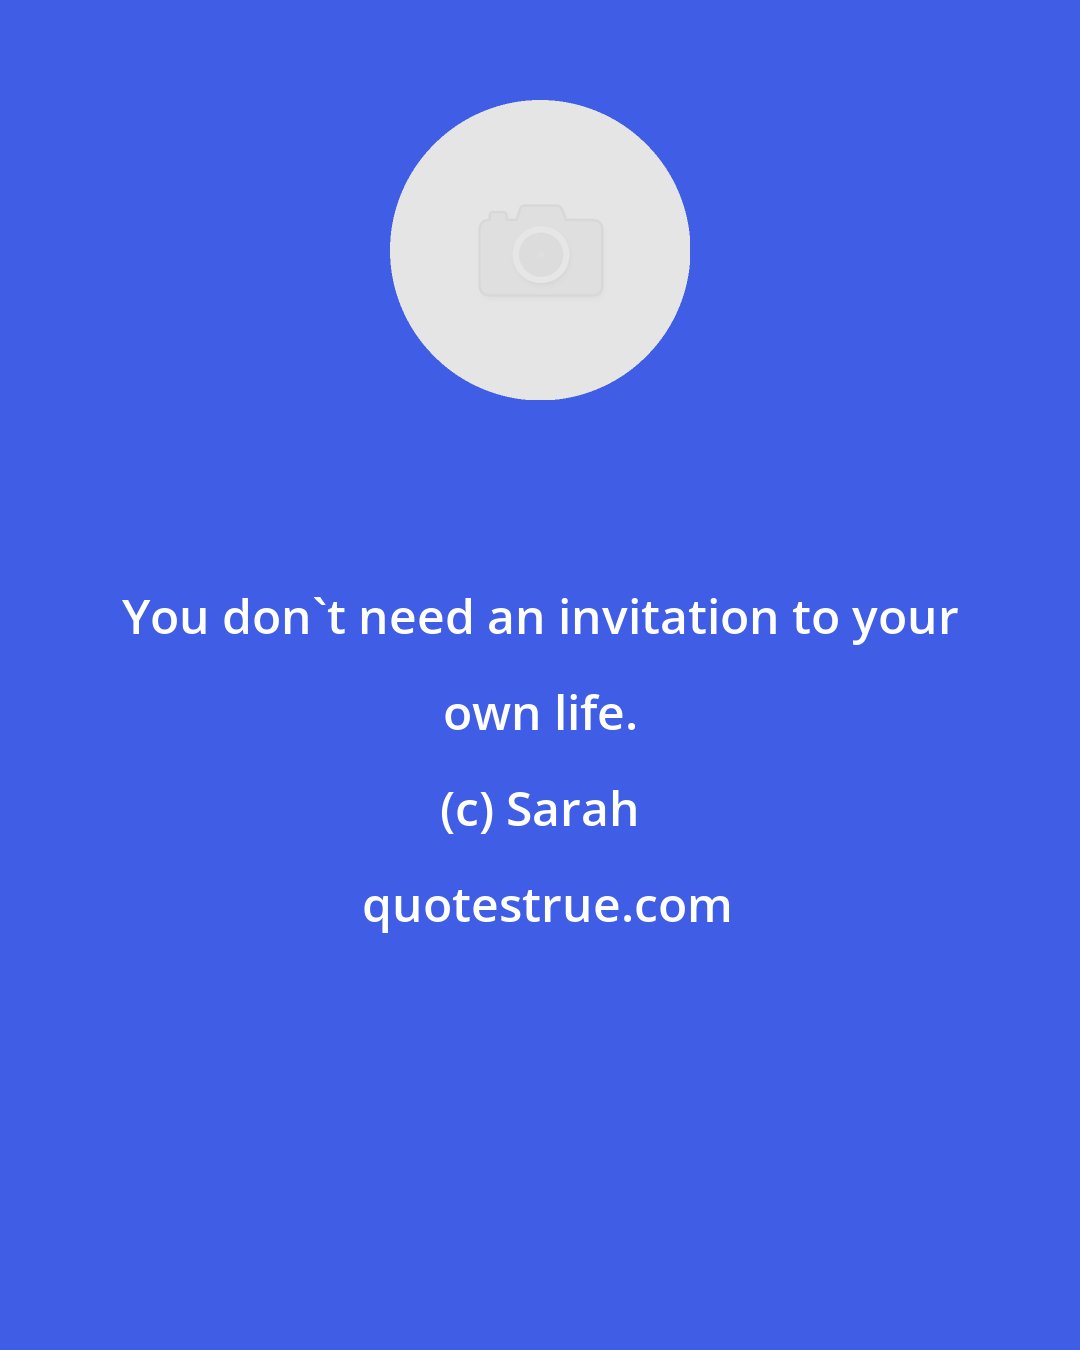 Sarah: You don't need an invitation to your own life.